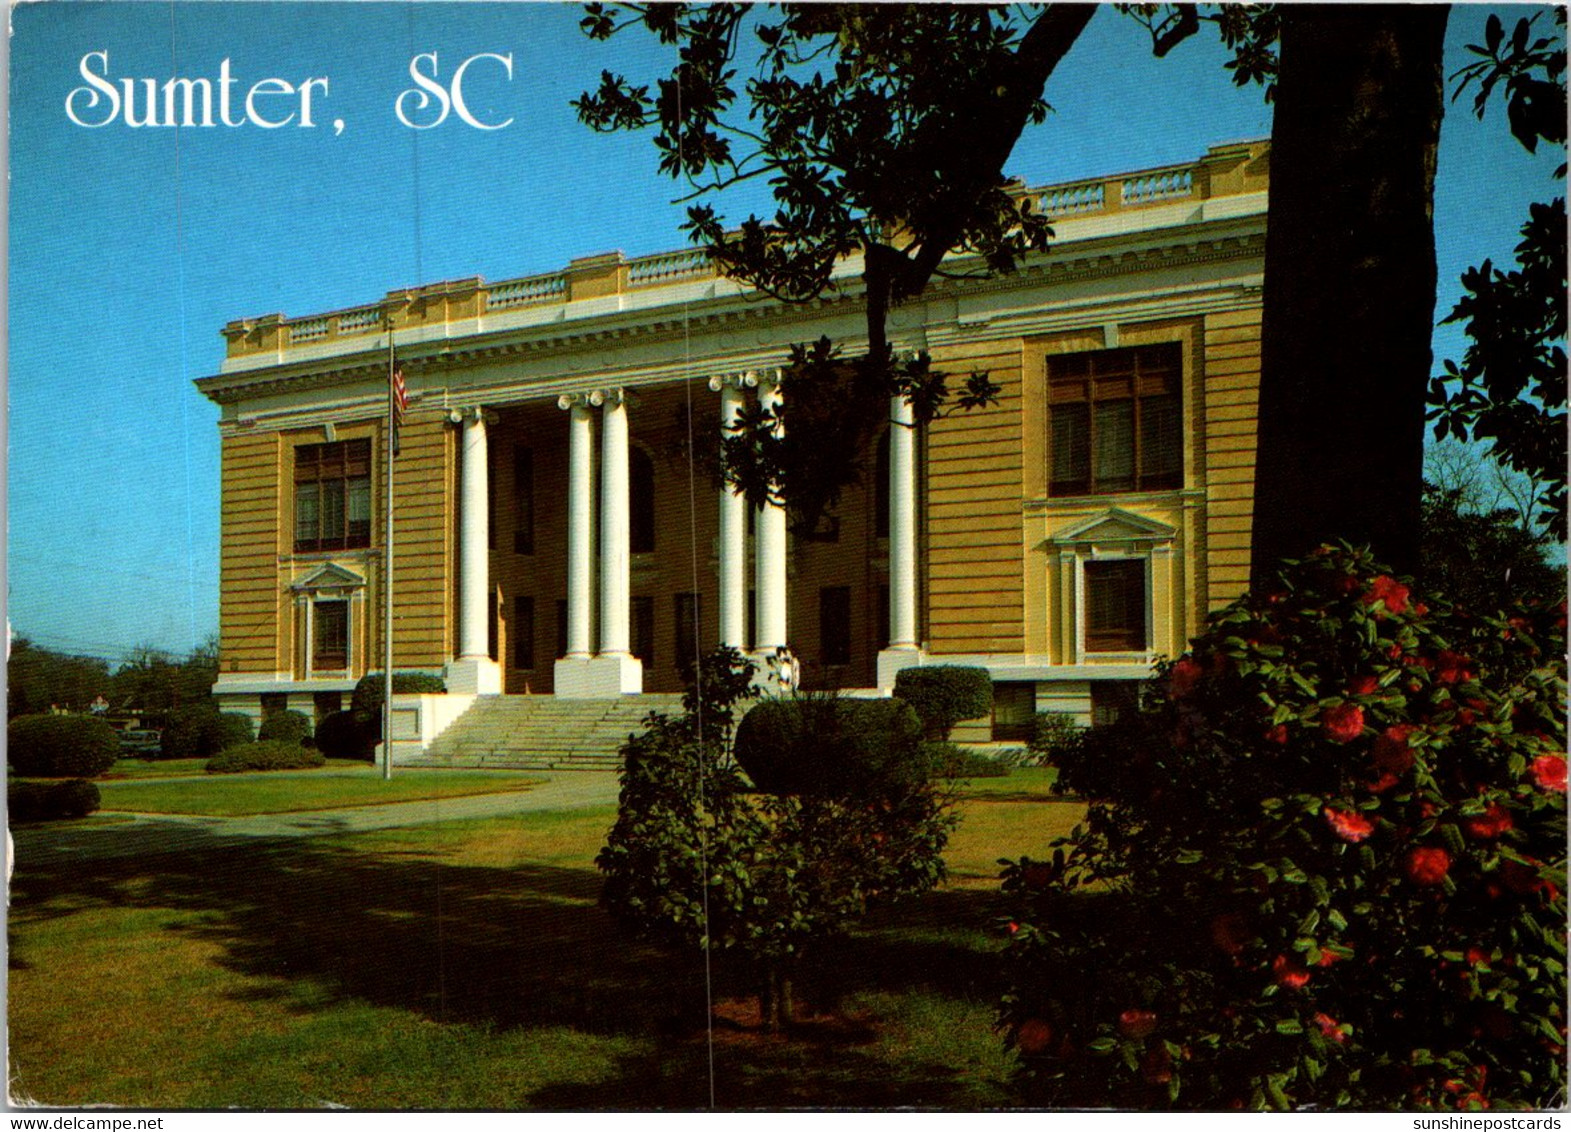 South Carolina Sumter The Sumter County Court House 1996 - Sumter